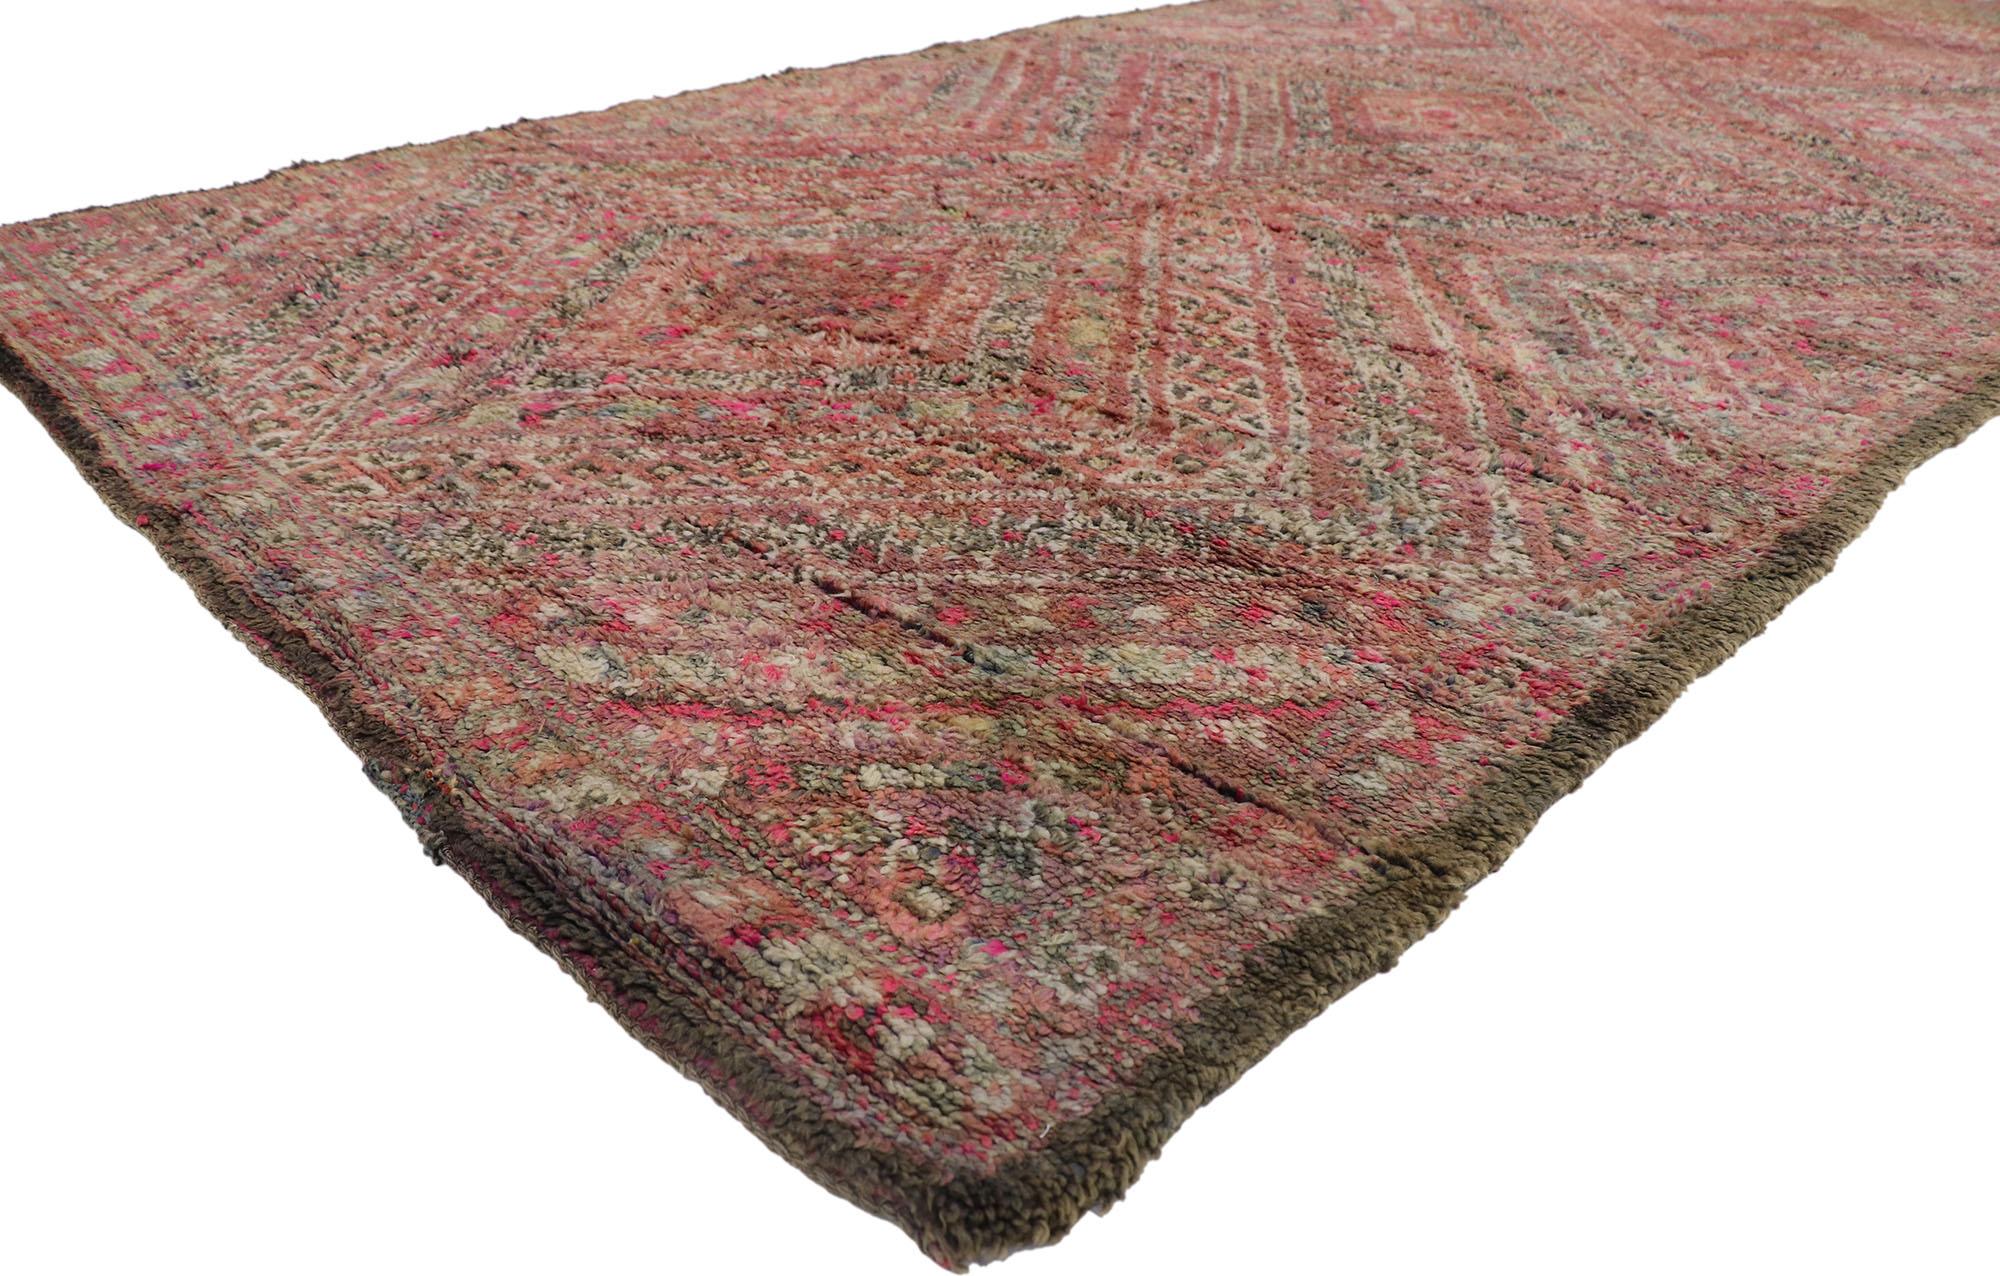 21229 Vintage Beni MGuild Moroccan Rug, 06'05 x 13'00. 
Originating from the Beni M'Guild tribe nestled in Morocco's Middle Atlas Mountains, Beni M'Guild rugs represent a cherished tradition meticulously crafted by skilled Berber women. These rugs